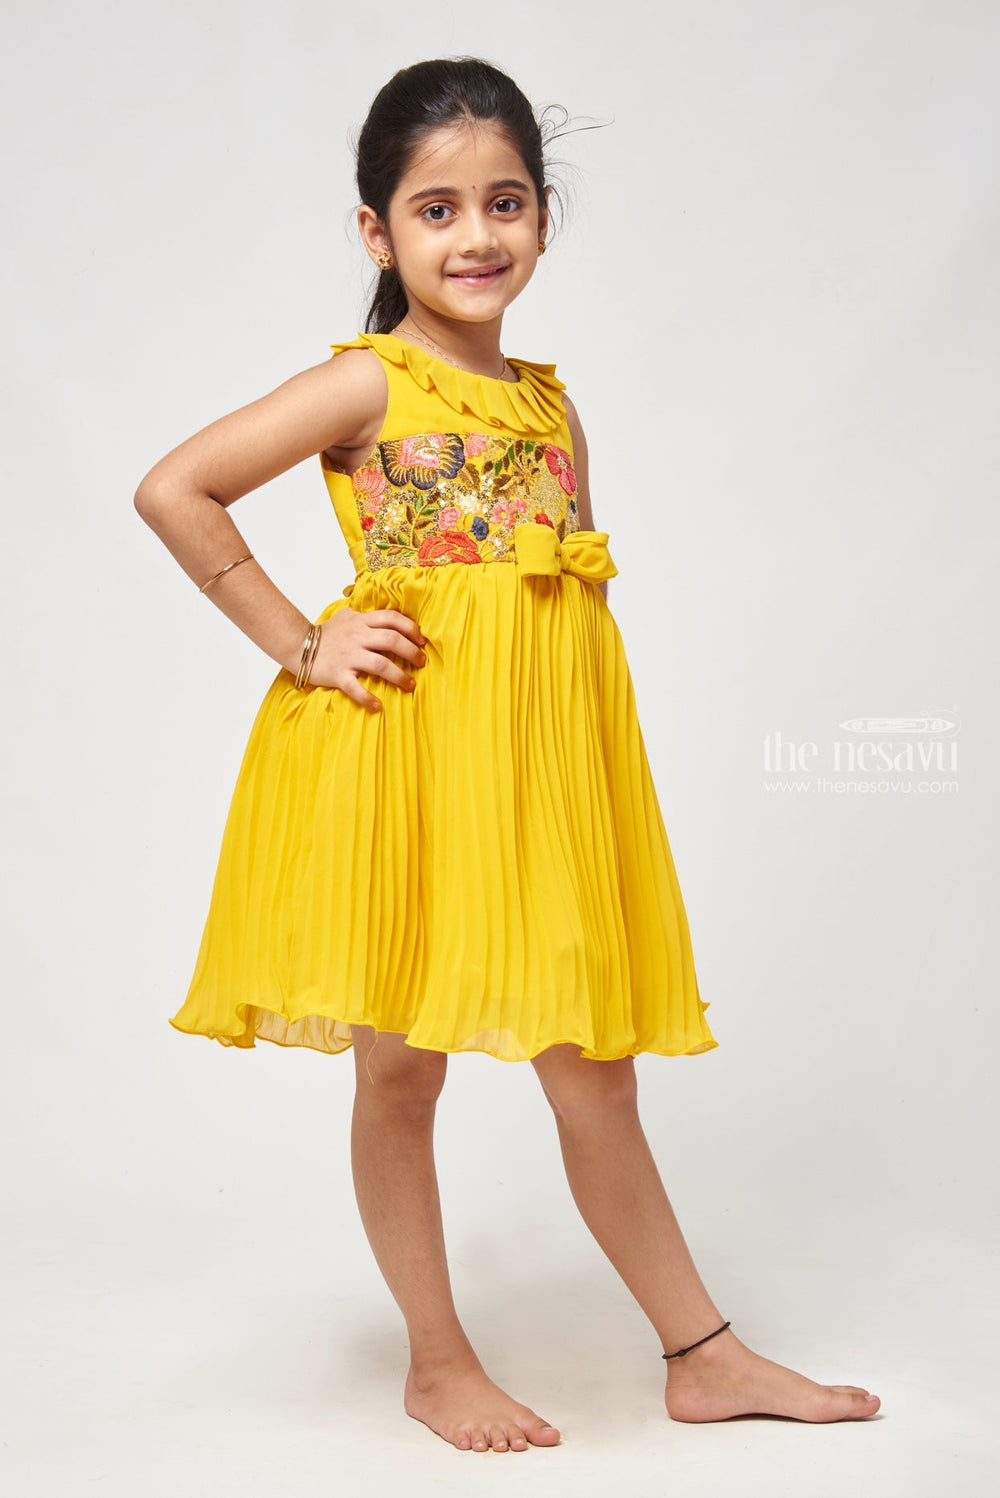 The Nesavu Girls Fancy Frock Kids Fancy Georgette Gown Ankle-Length with Halter Neck Design Nesavu Tiered Party Dress For Girls - Stylish Choice For Casual Outings | The Nesavu